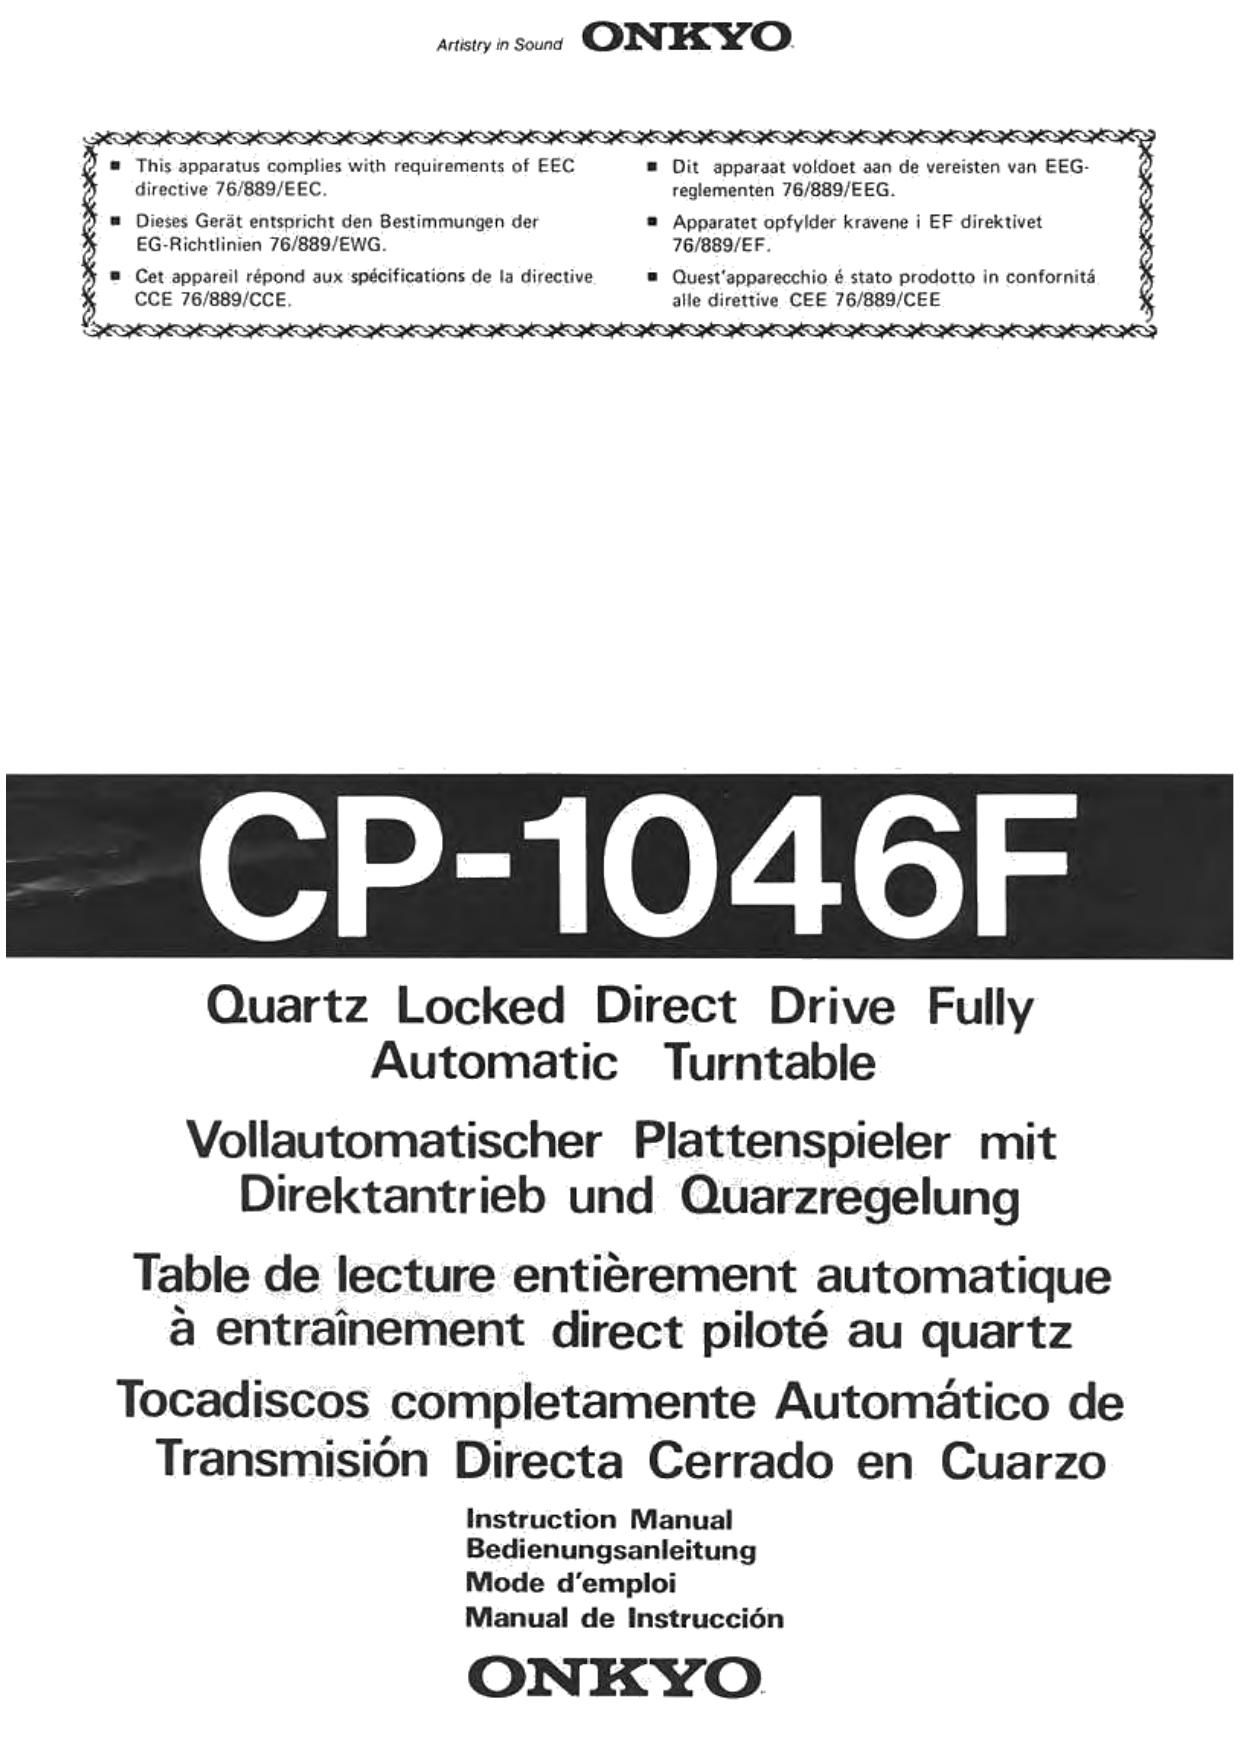 Onkyo CP 1046 F Owners Manual